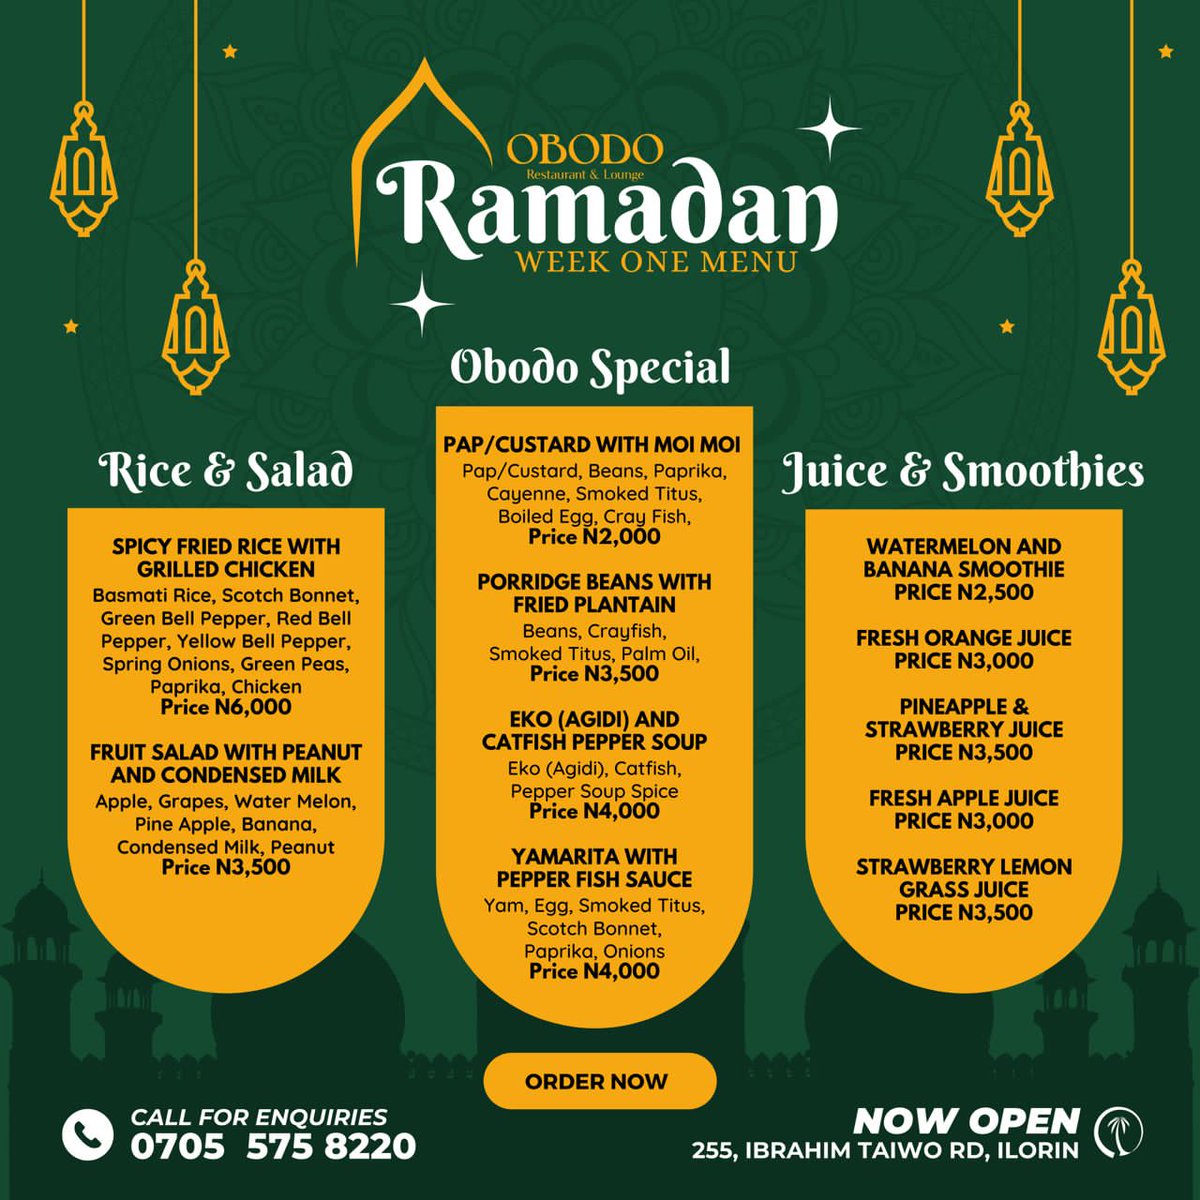 We are happy to announce our IFTAR MENU for #Ramadan Week One Available daily from 7PM - 9PM Click the link in bio to make your reservation before 5pm daily. Available for dine in, pick up and home delivery. Call 07055758220 for more enquiries.